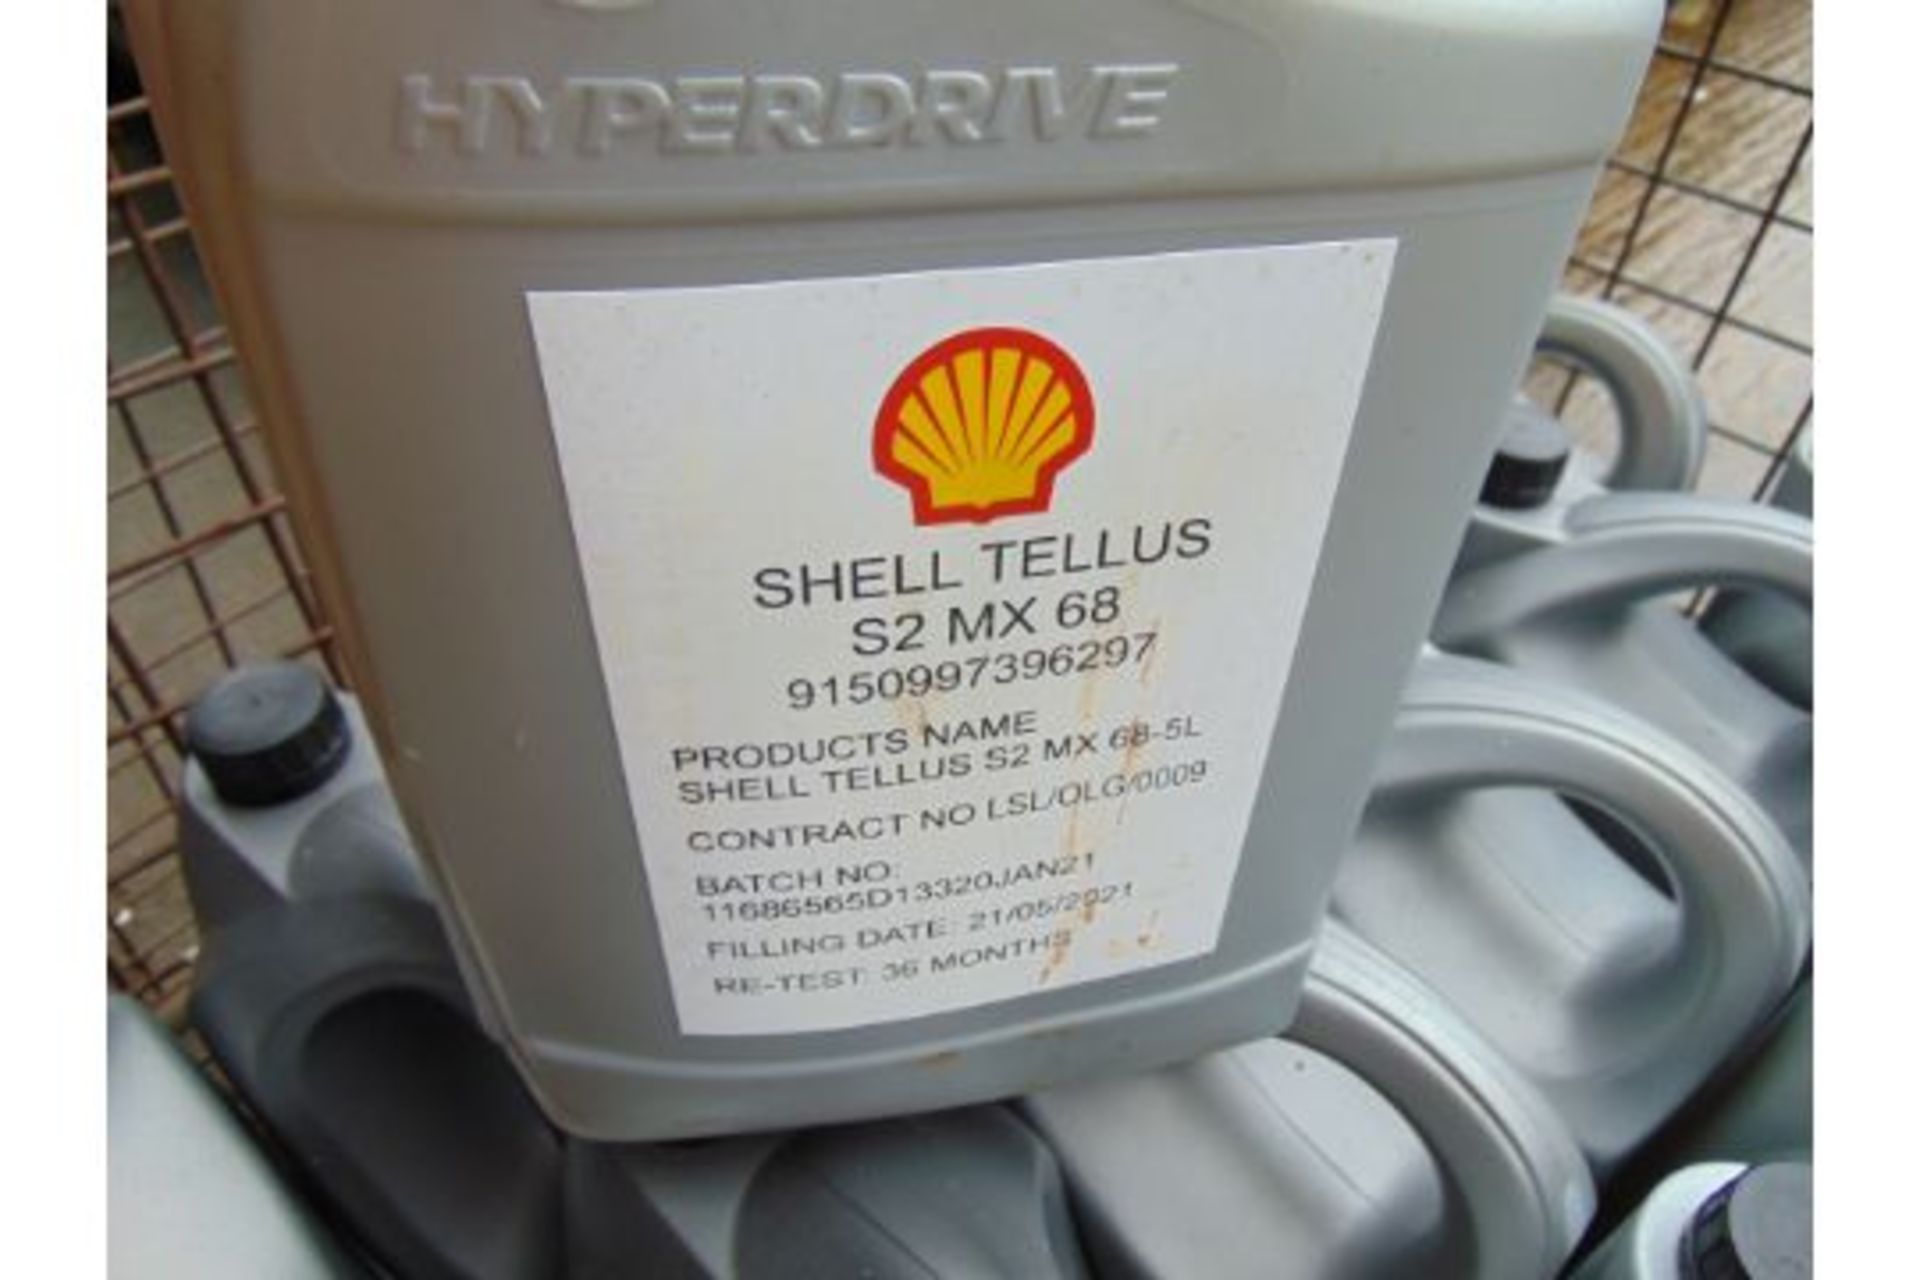 22 x 5 Litre Cans of Shell Tellus S2 MX68, Multigrade Anti wear Hydraulic Oil - Image 2 of 3